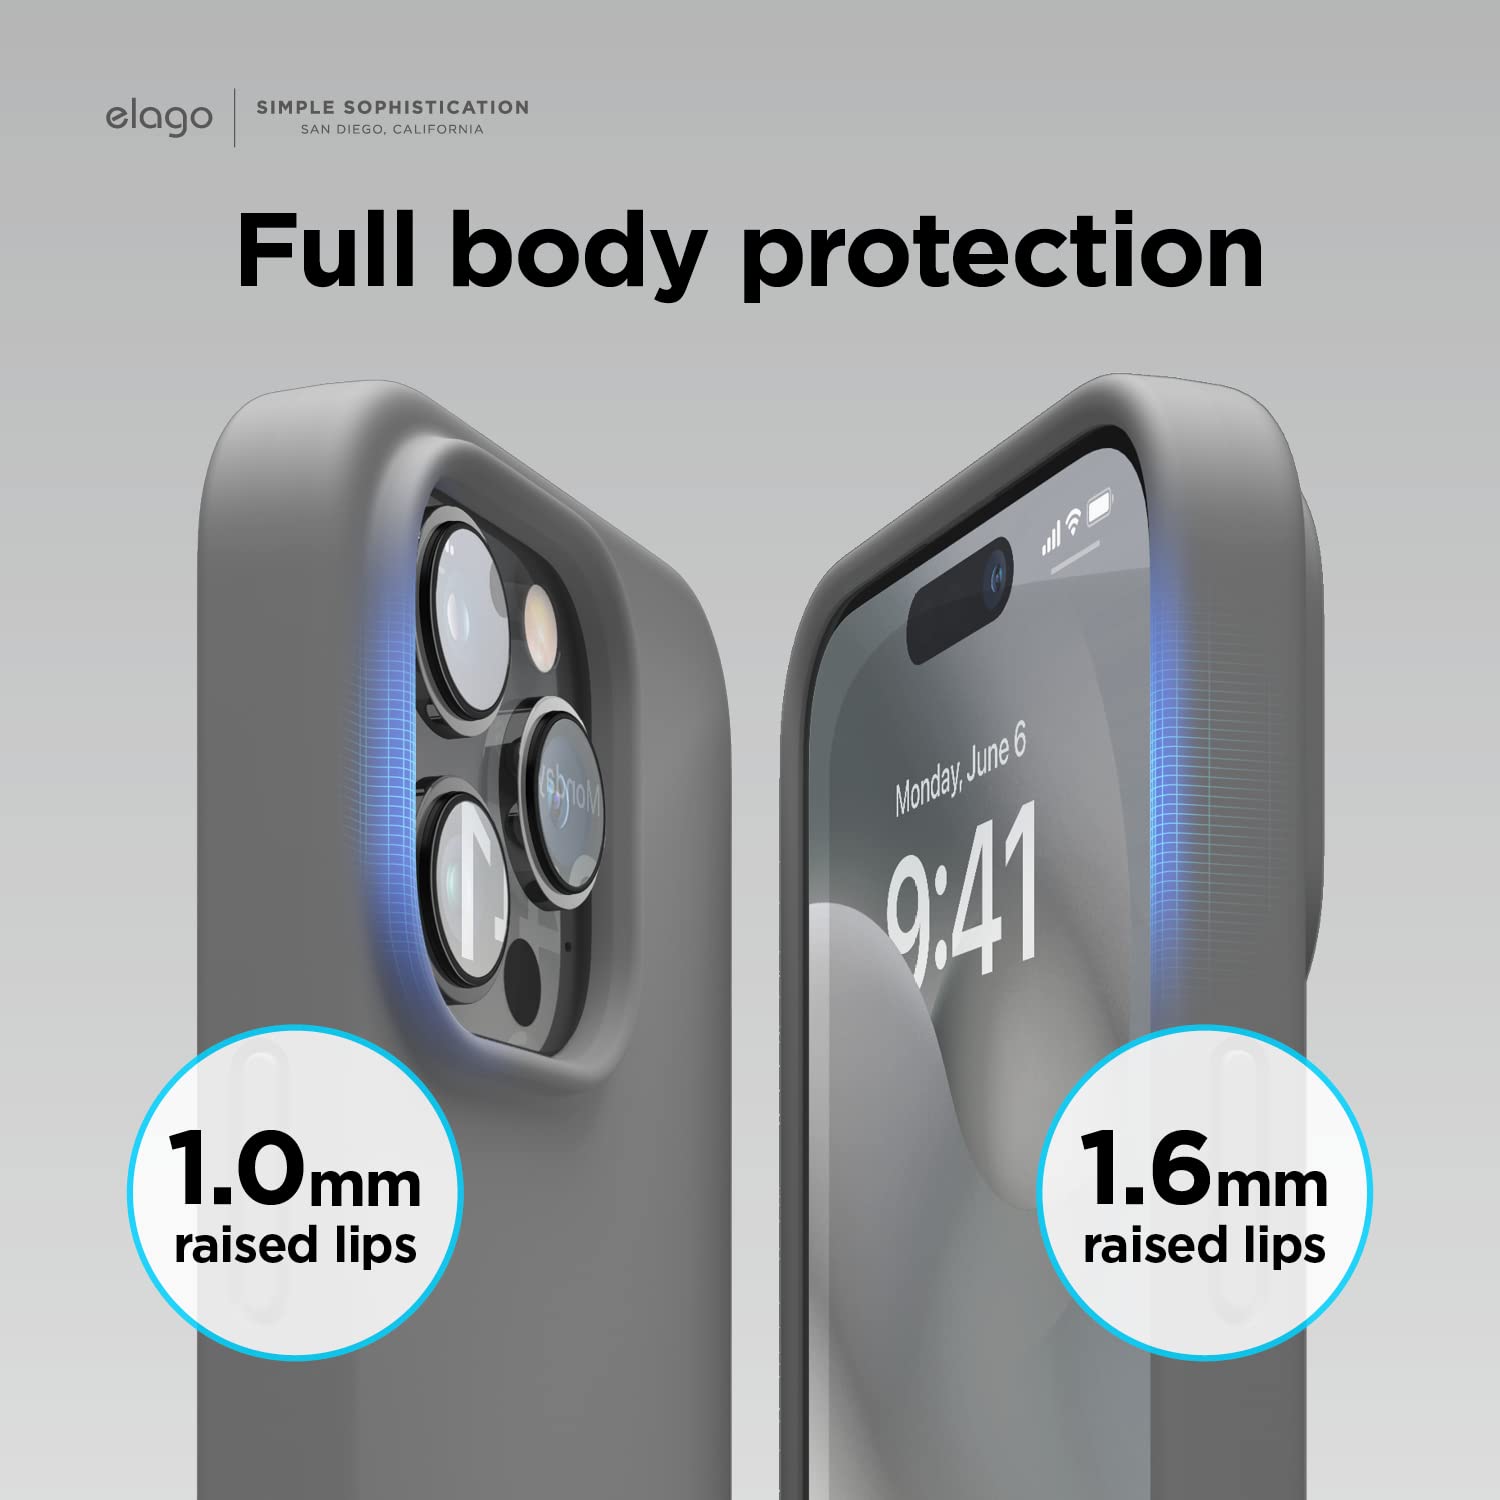 elago Compatible with iPhone 14 Pro Max Case, Liquid Silicone Case, Full Body Protective Cover, Shockproof, Slim Phone Case, Anti-Scratch Soft Microfiber Lining, 6.7 inch (Dark Grey)